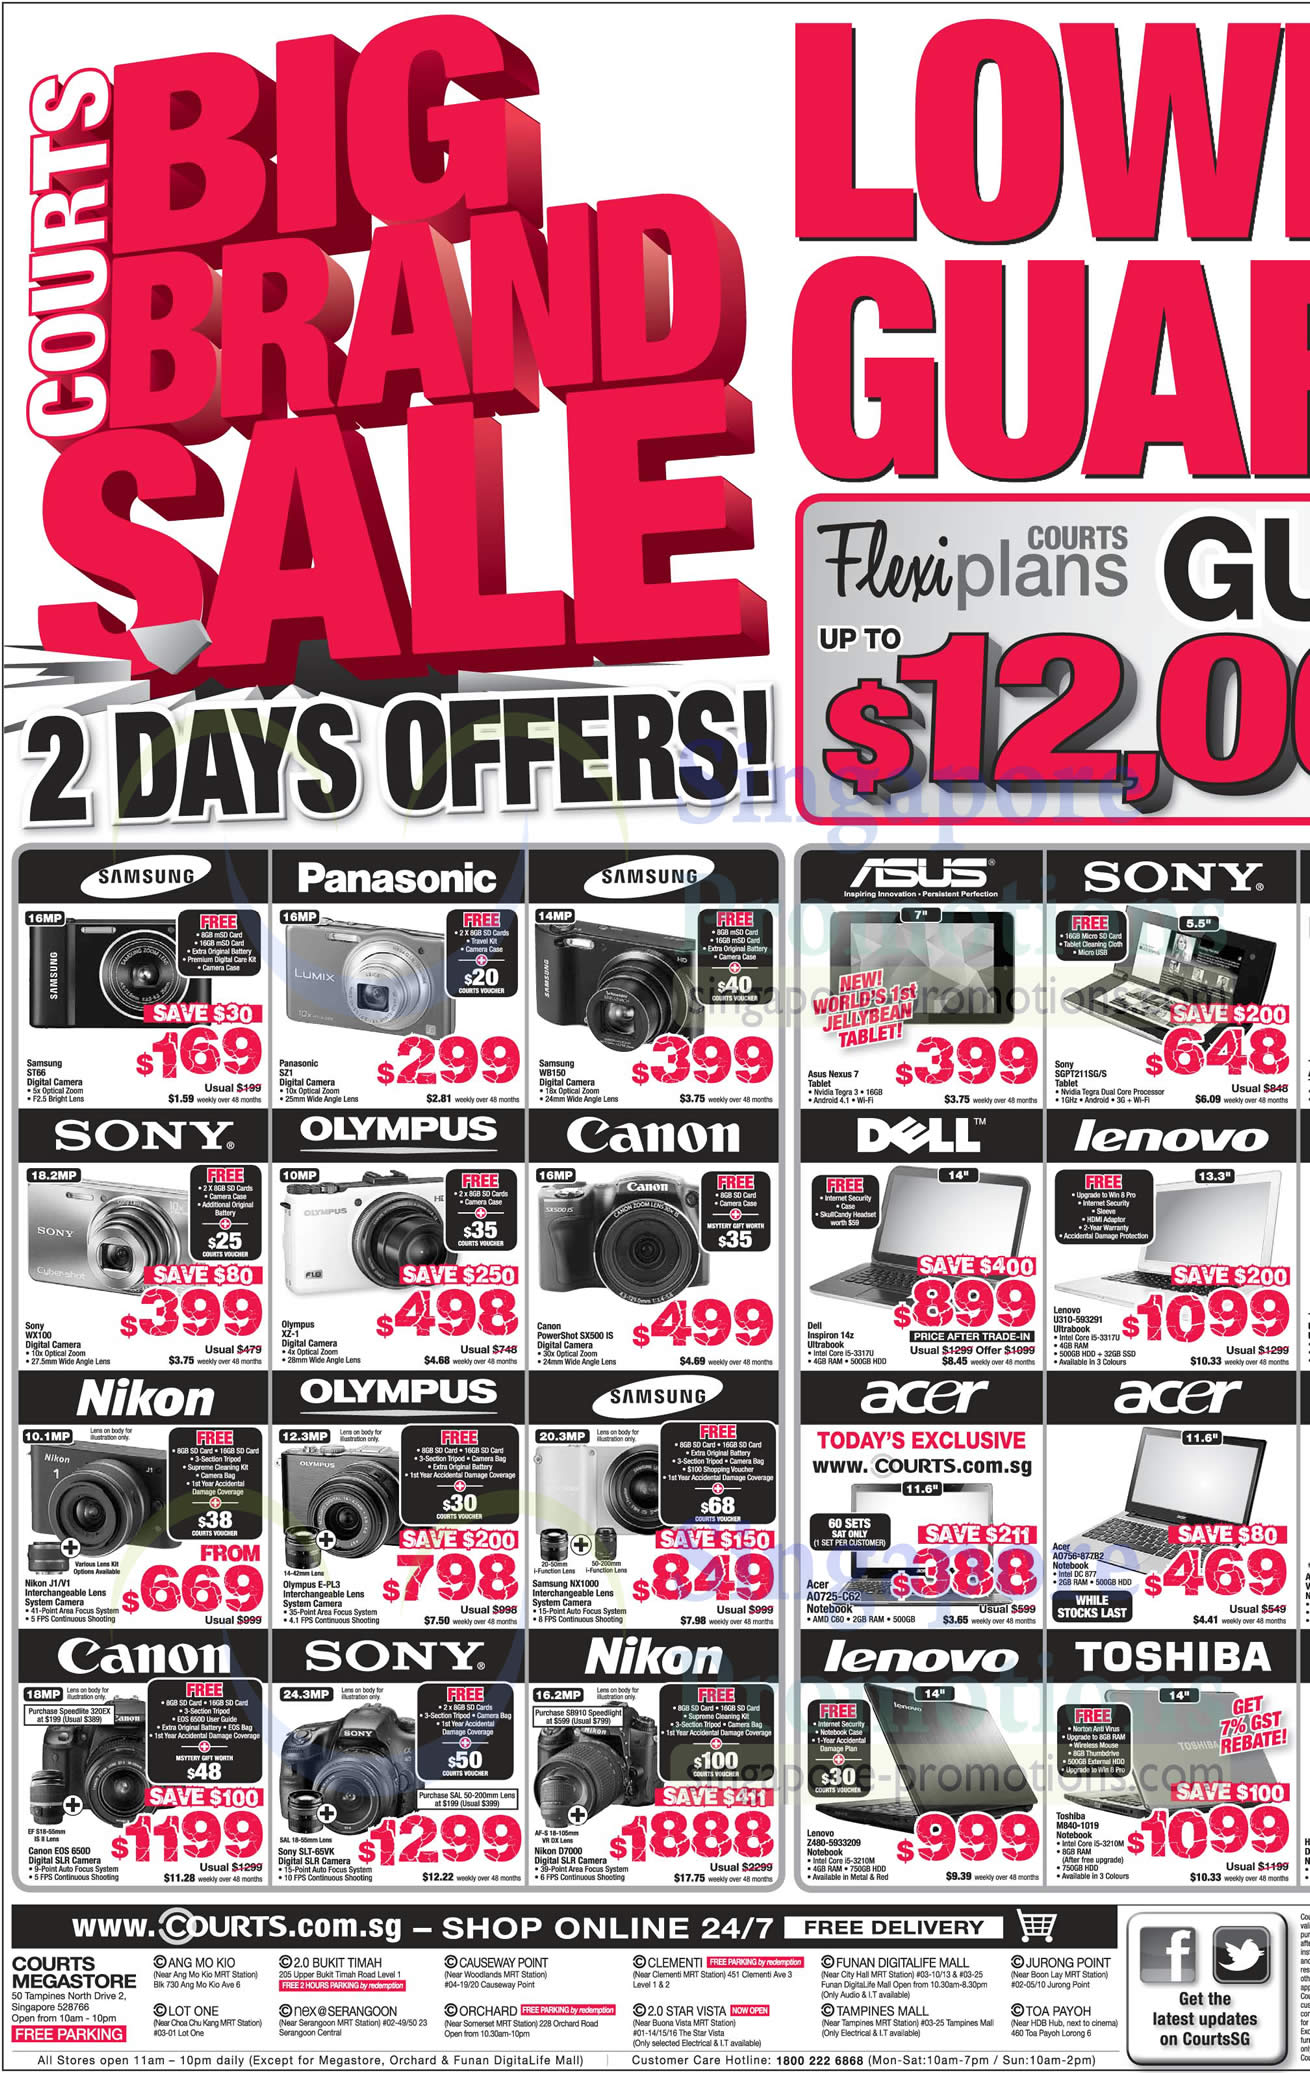 Featured image for Courts Big Brand Sale Promotion 13 - 14 Oct 2012